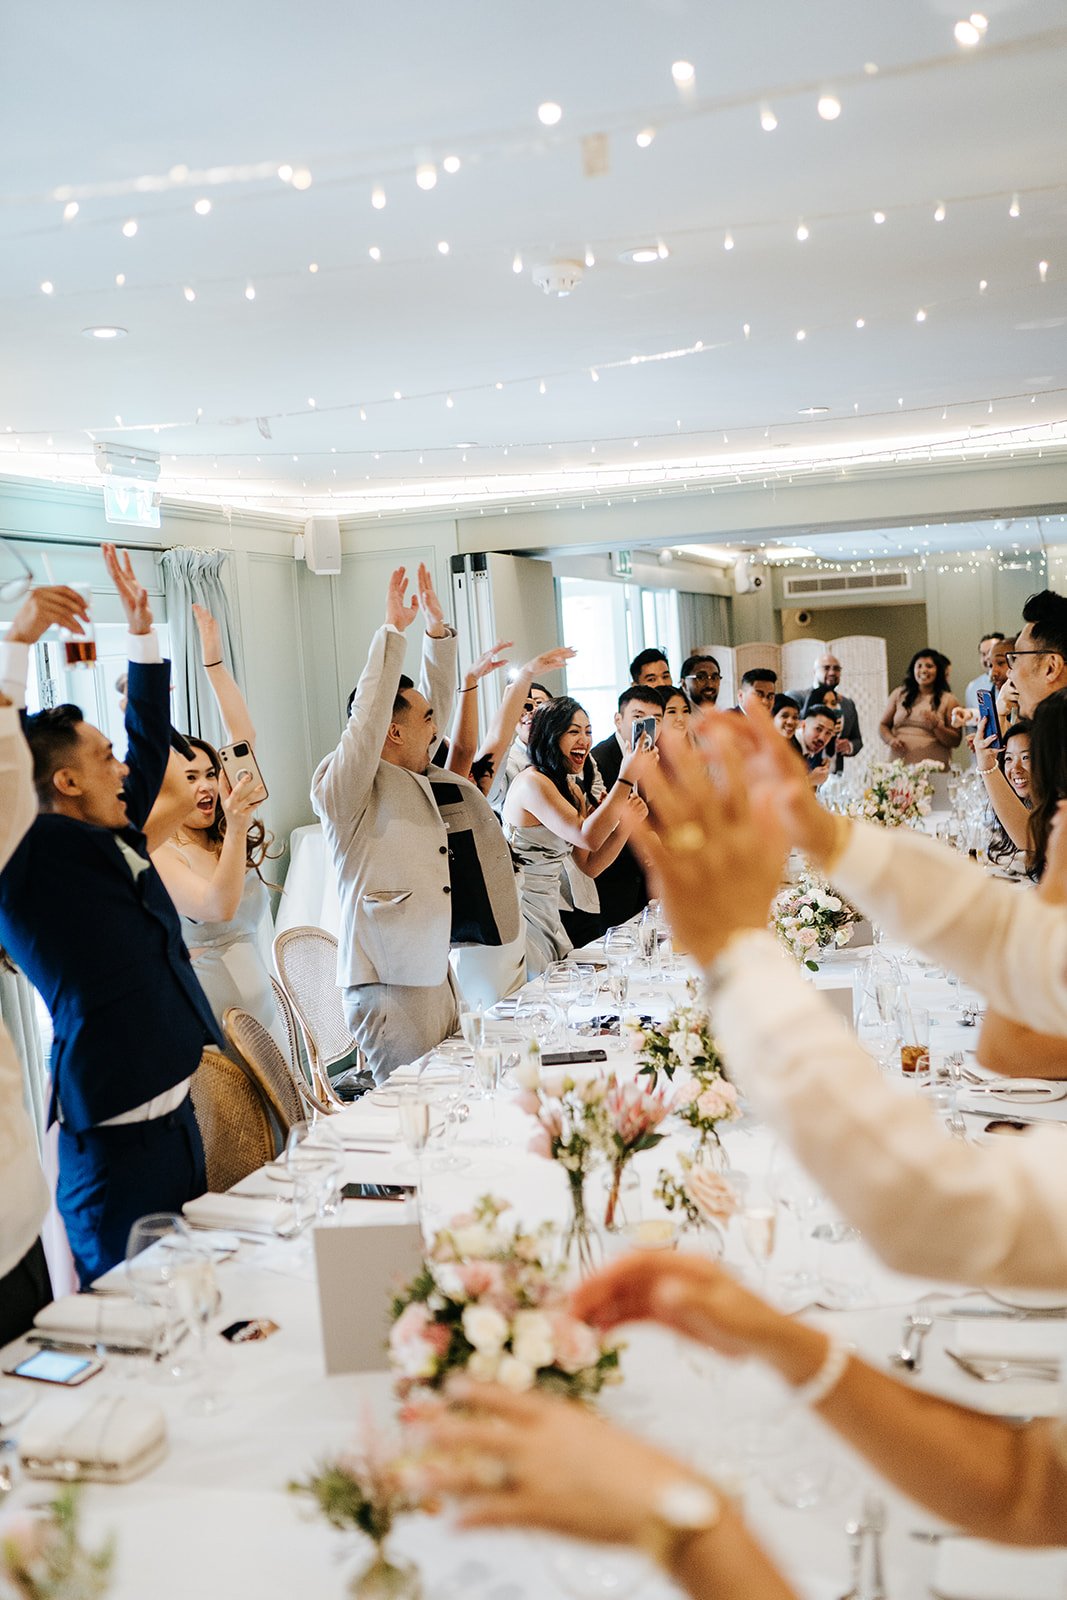 Excited guests stand up from their seats to make mexican wave as bride and groom enter the wedding breakfast room 